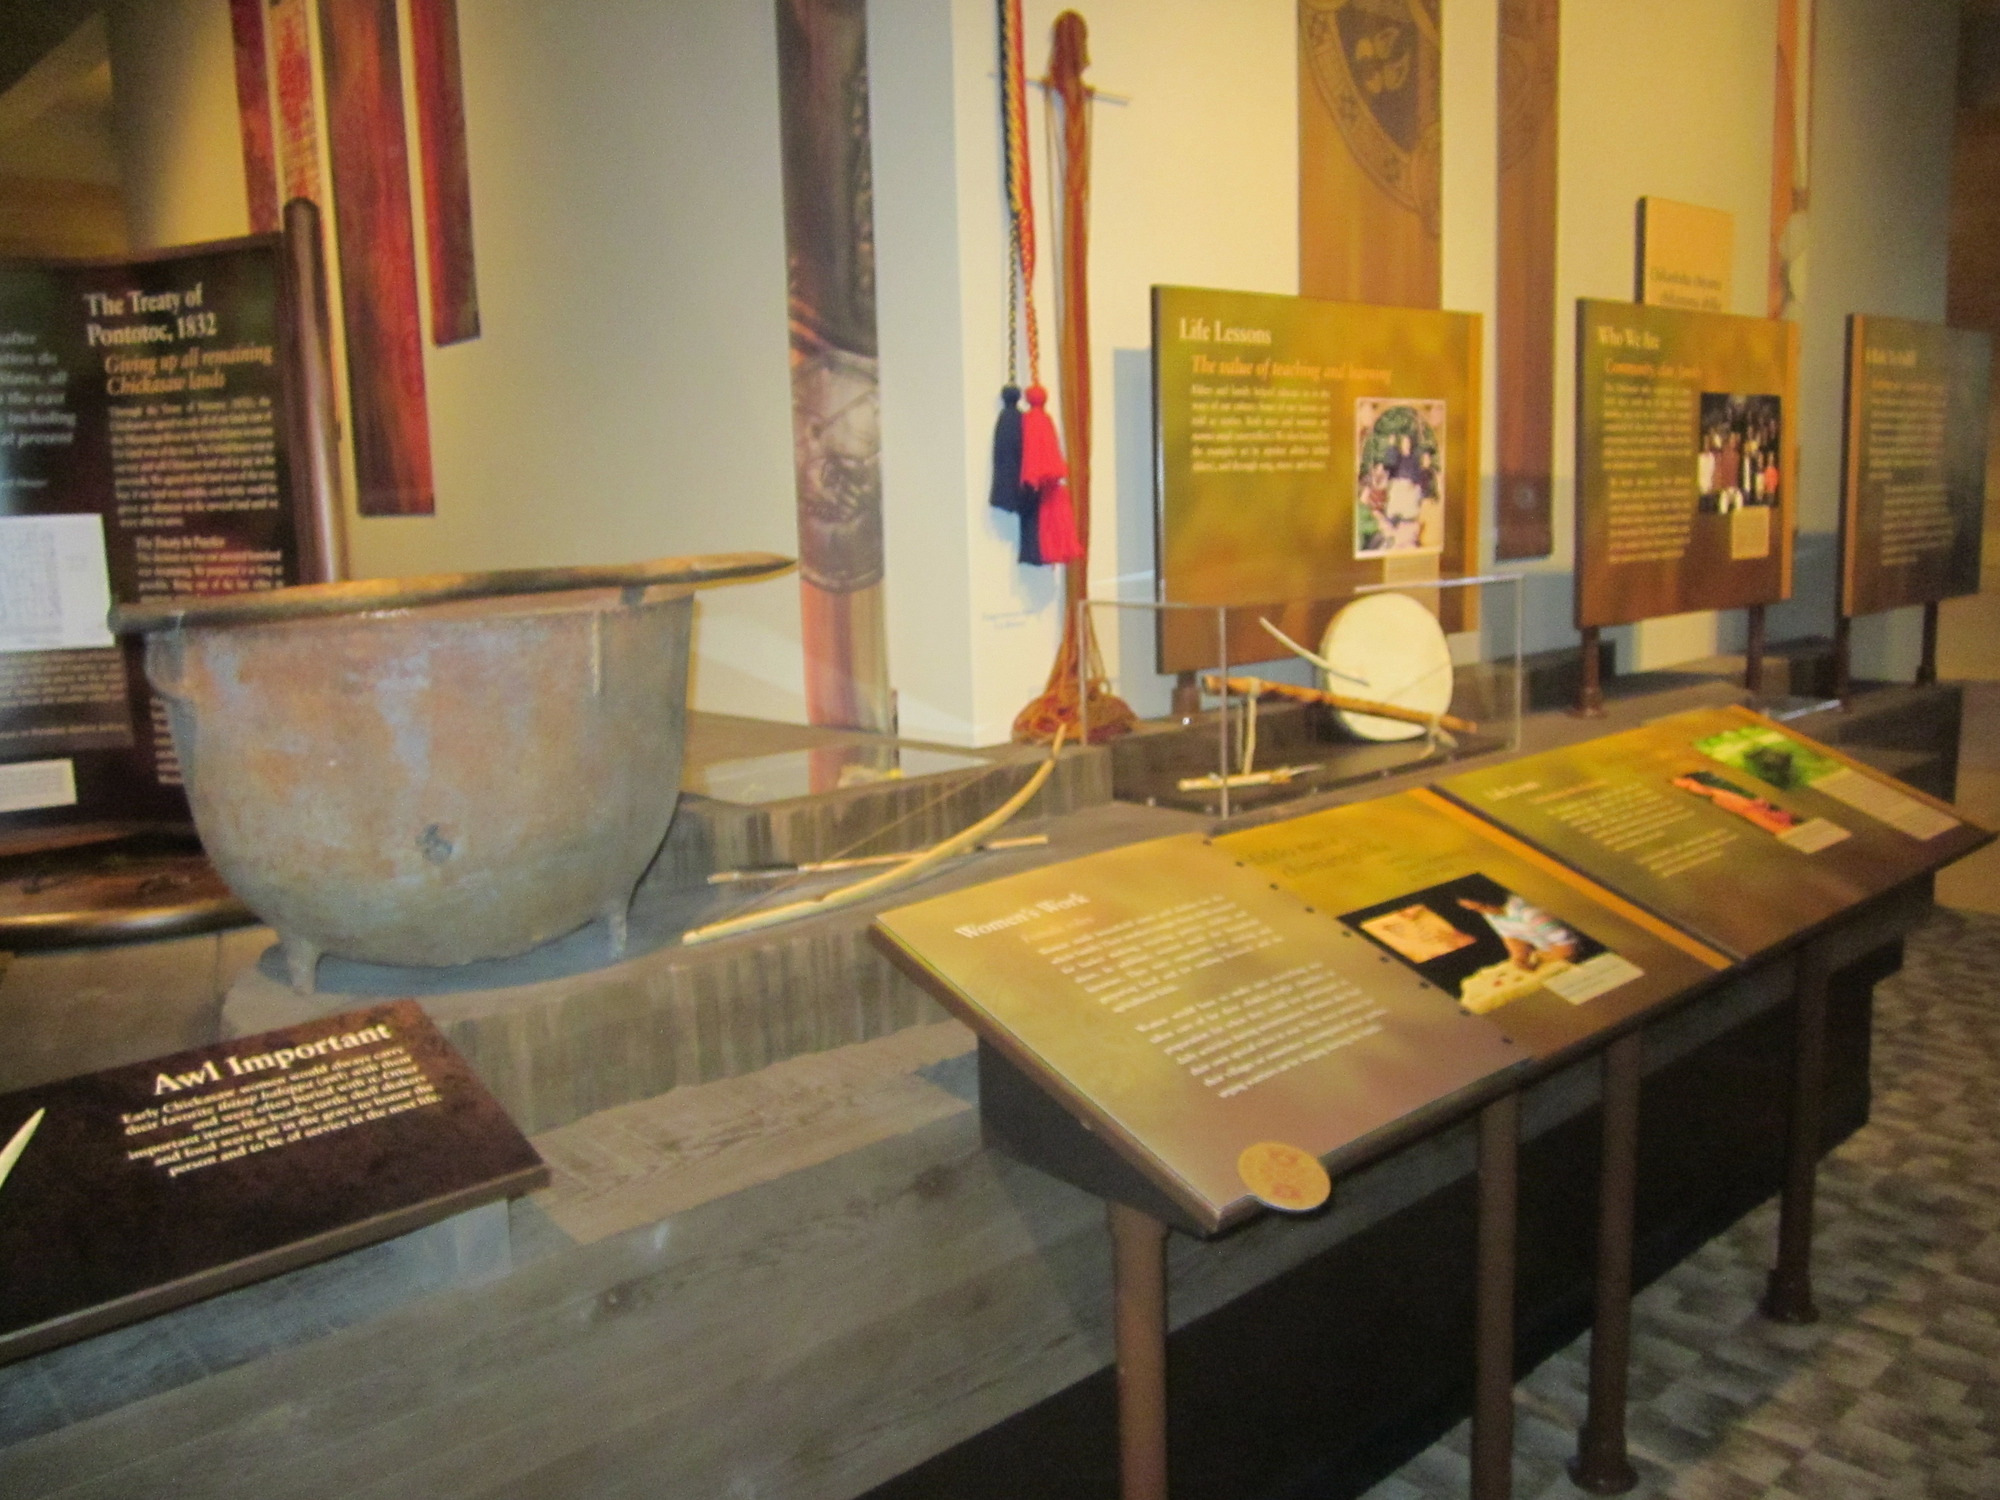 An Awl exhibit at the Chickasaw Cultural Center Museum during the 2012 Trail of Tears Conference in Sulphur, Oklahoma near the Chickasaw National Recreation Area